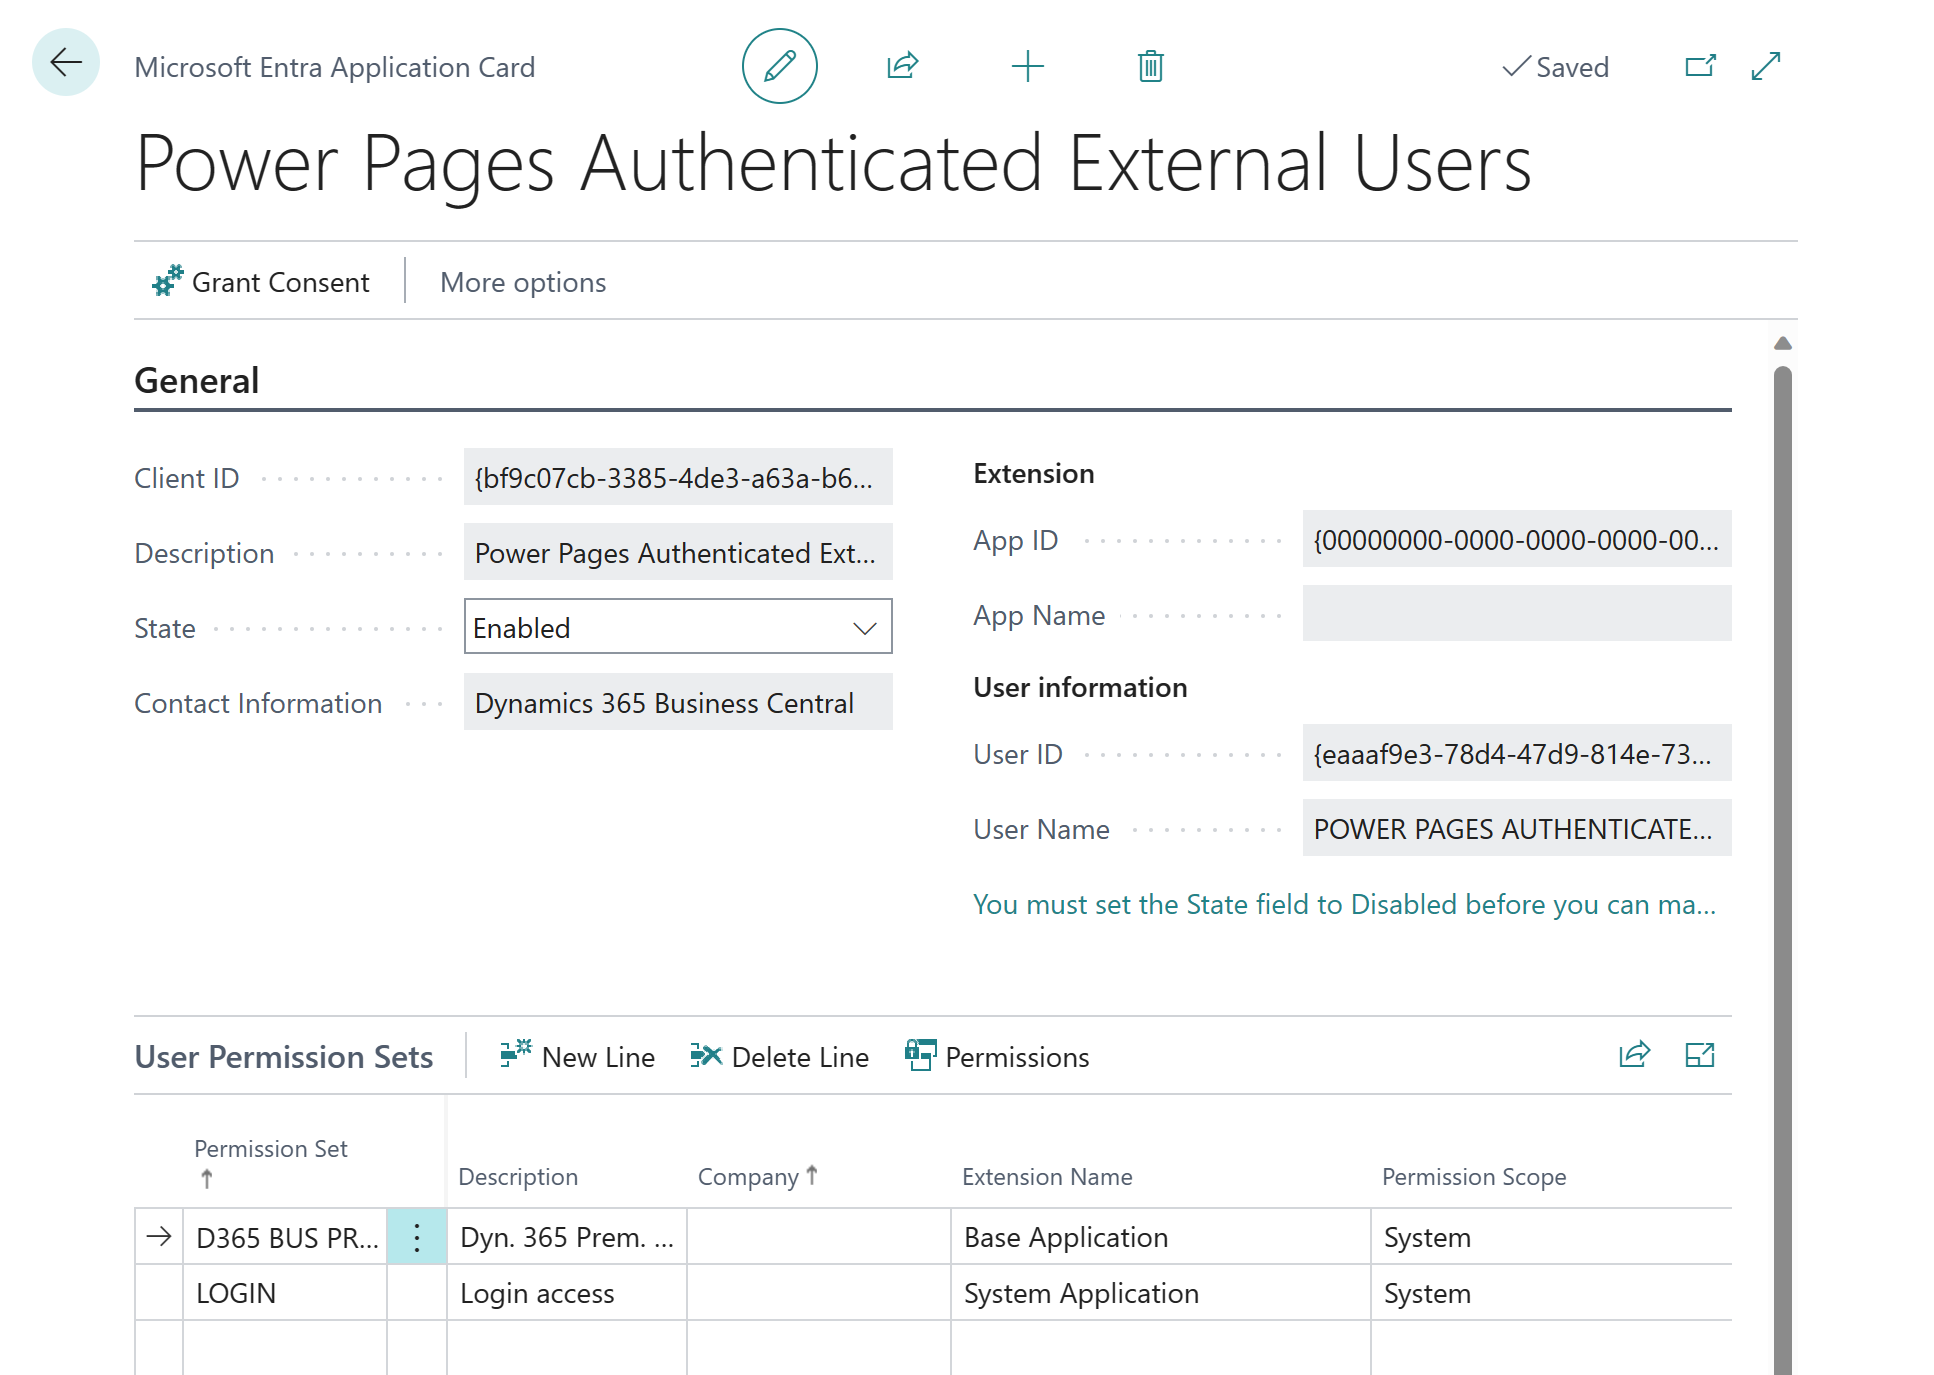 Screenshot of the Power Pages Authenticated External Users card in Business Central